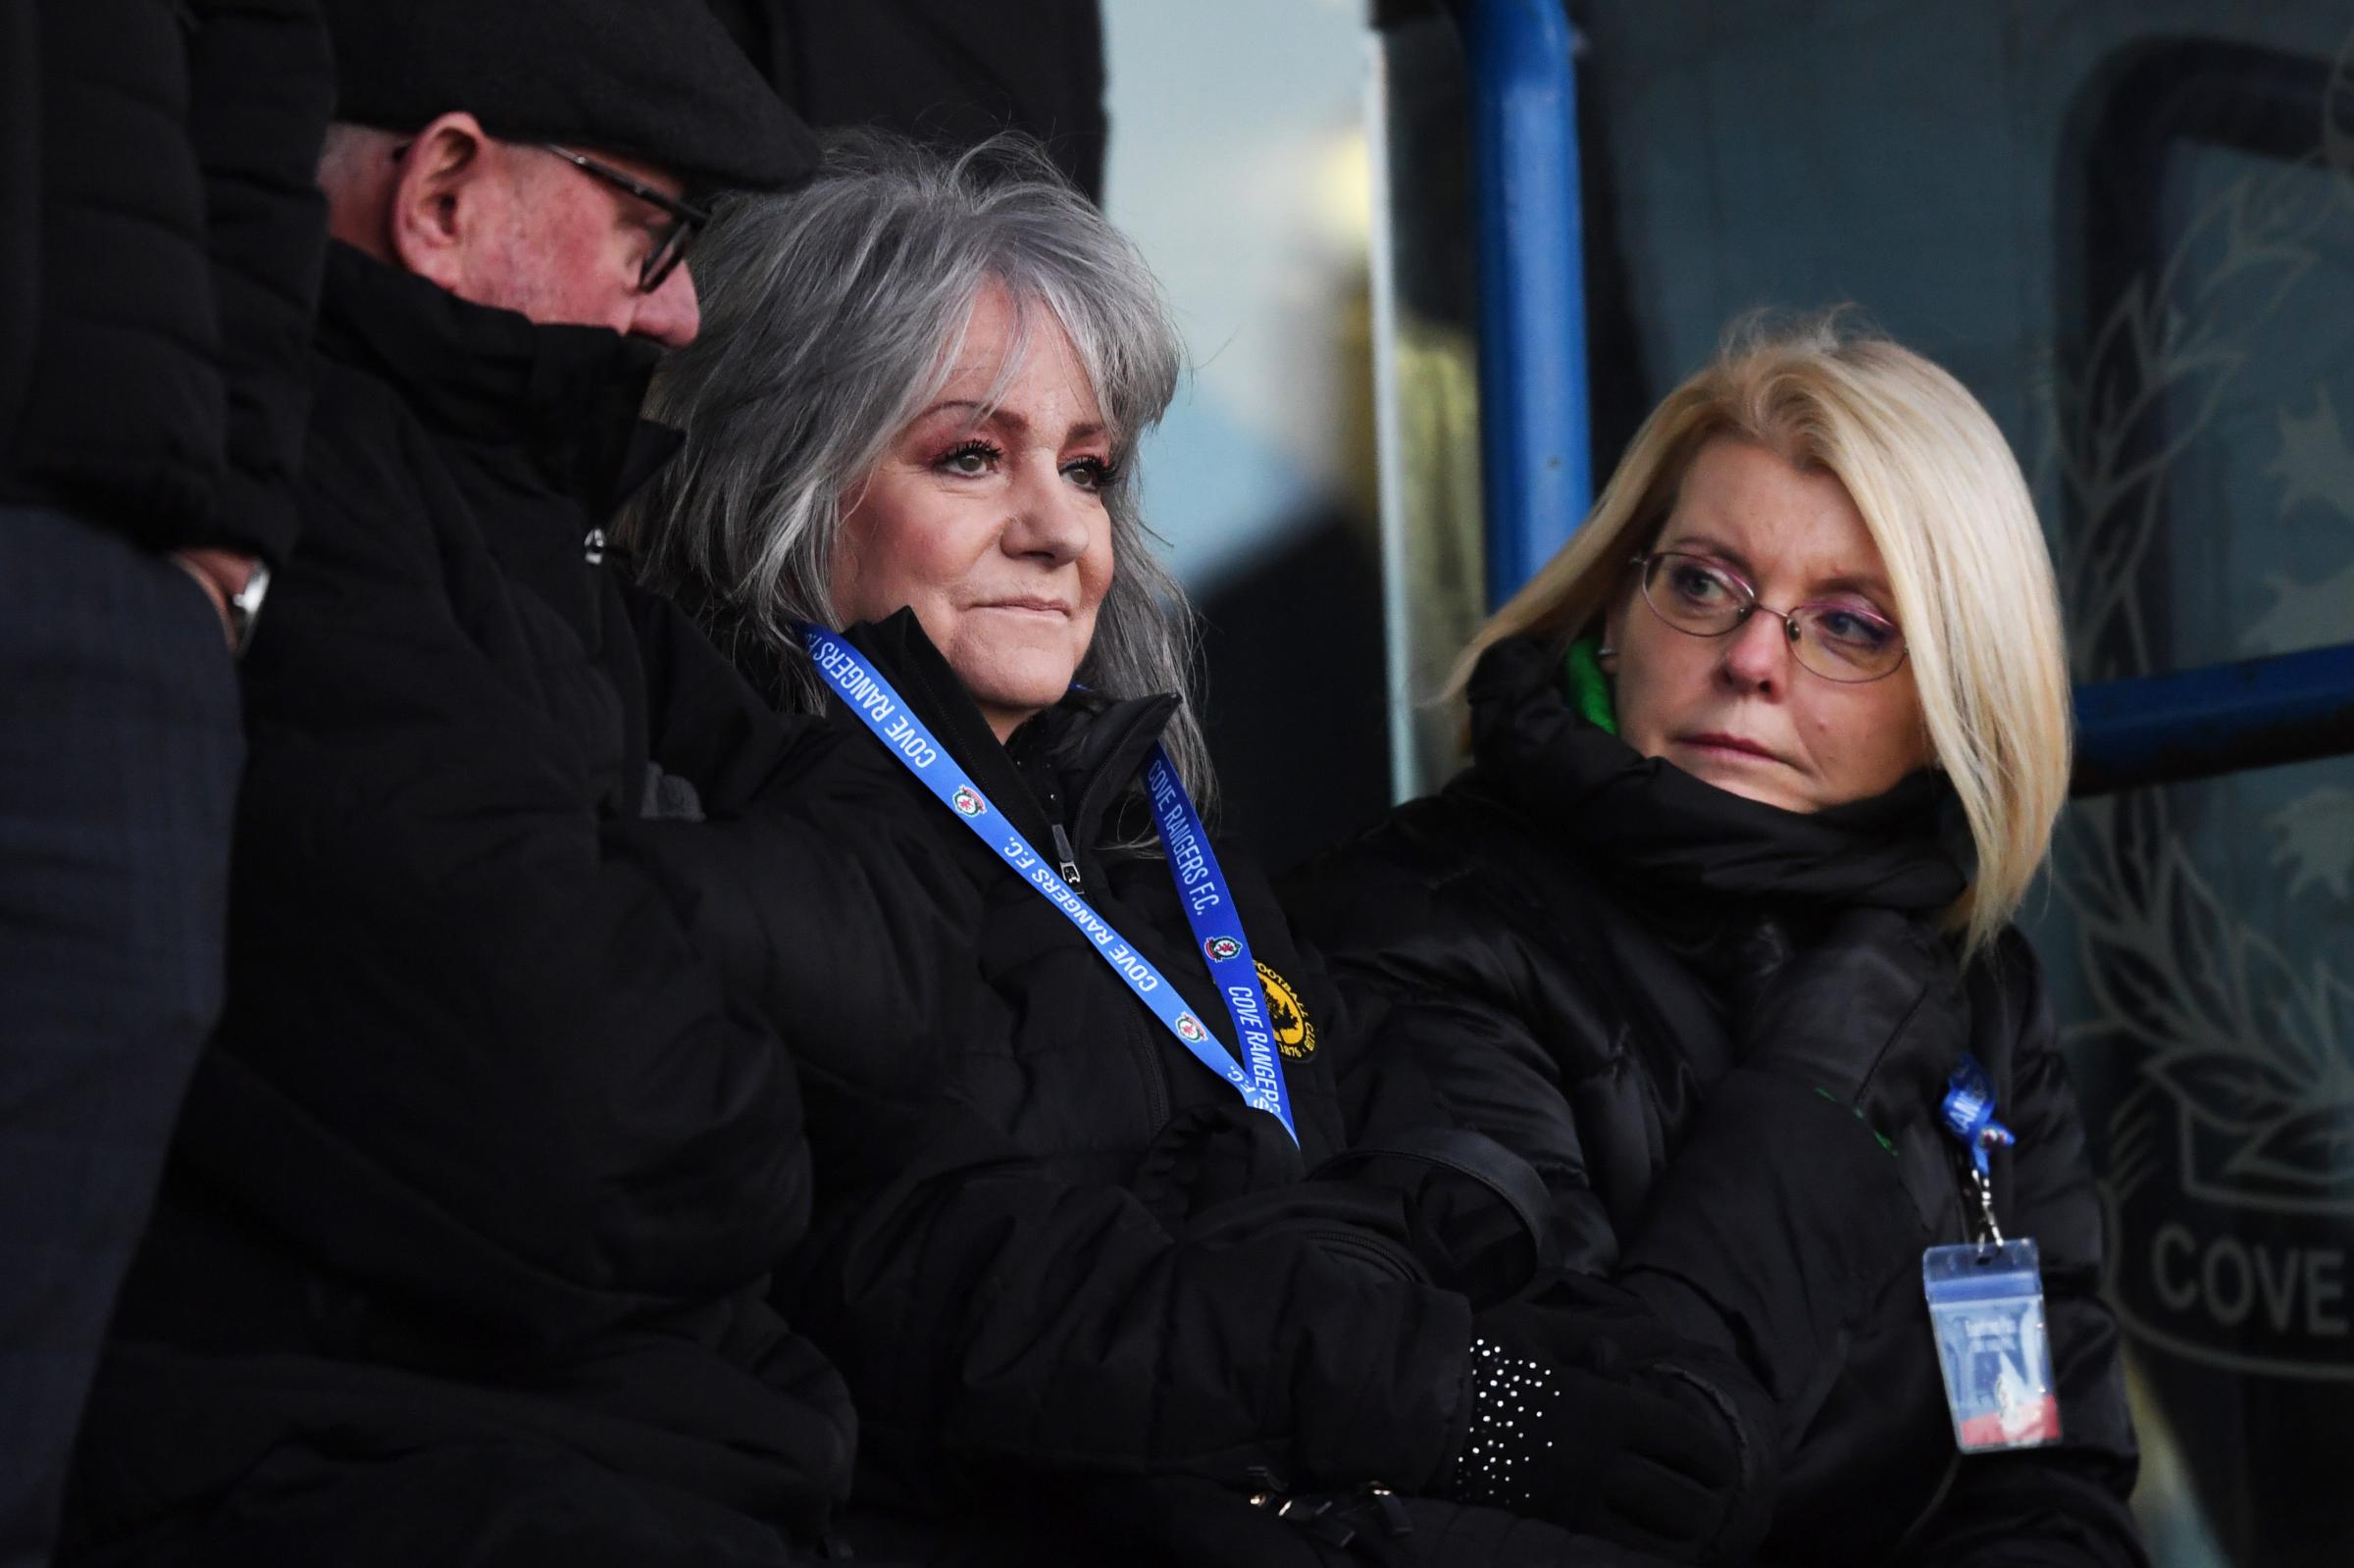 Partick Thistle chair Jacqui Low and several directors to exit Firhill